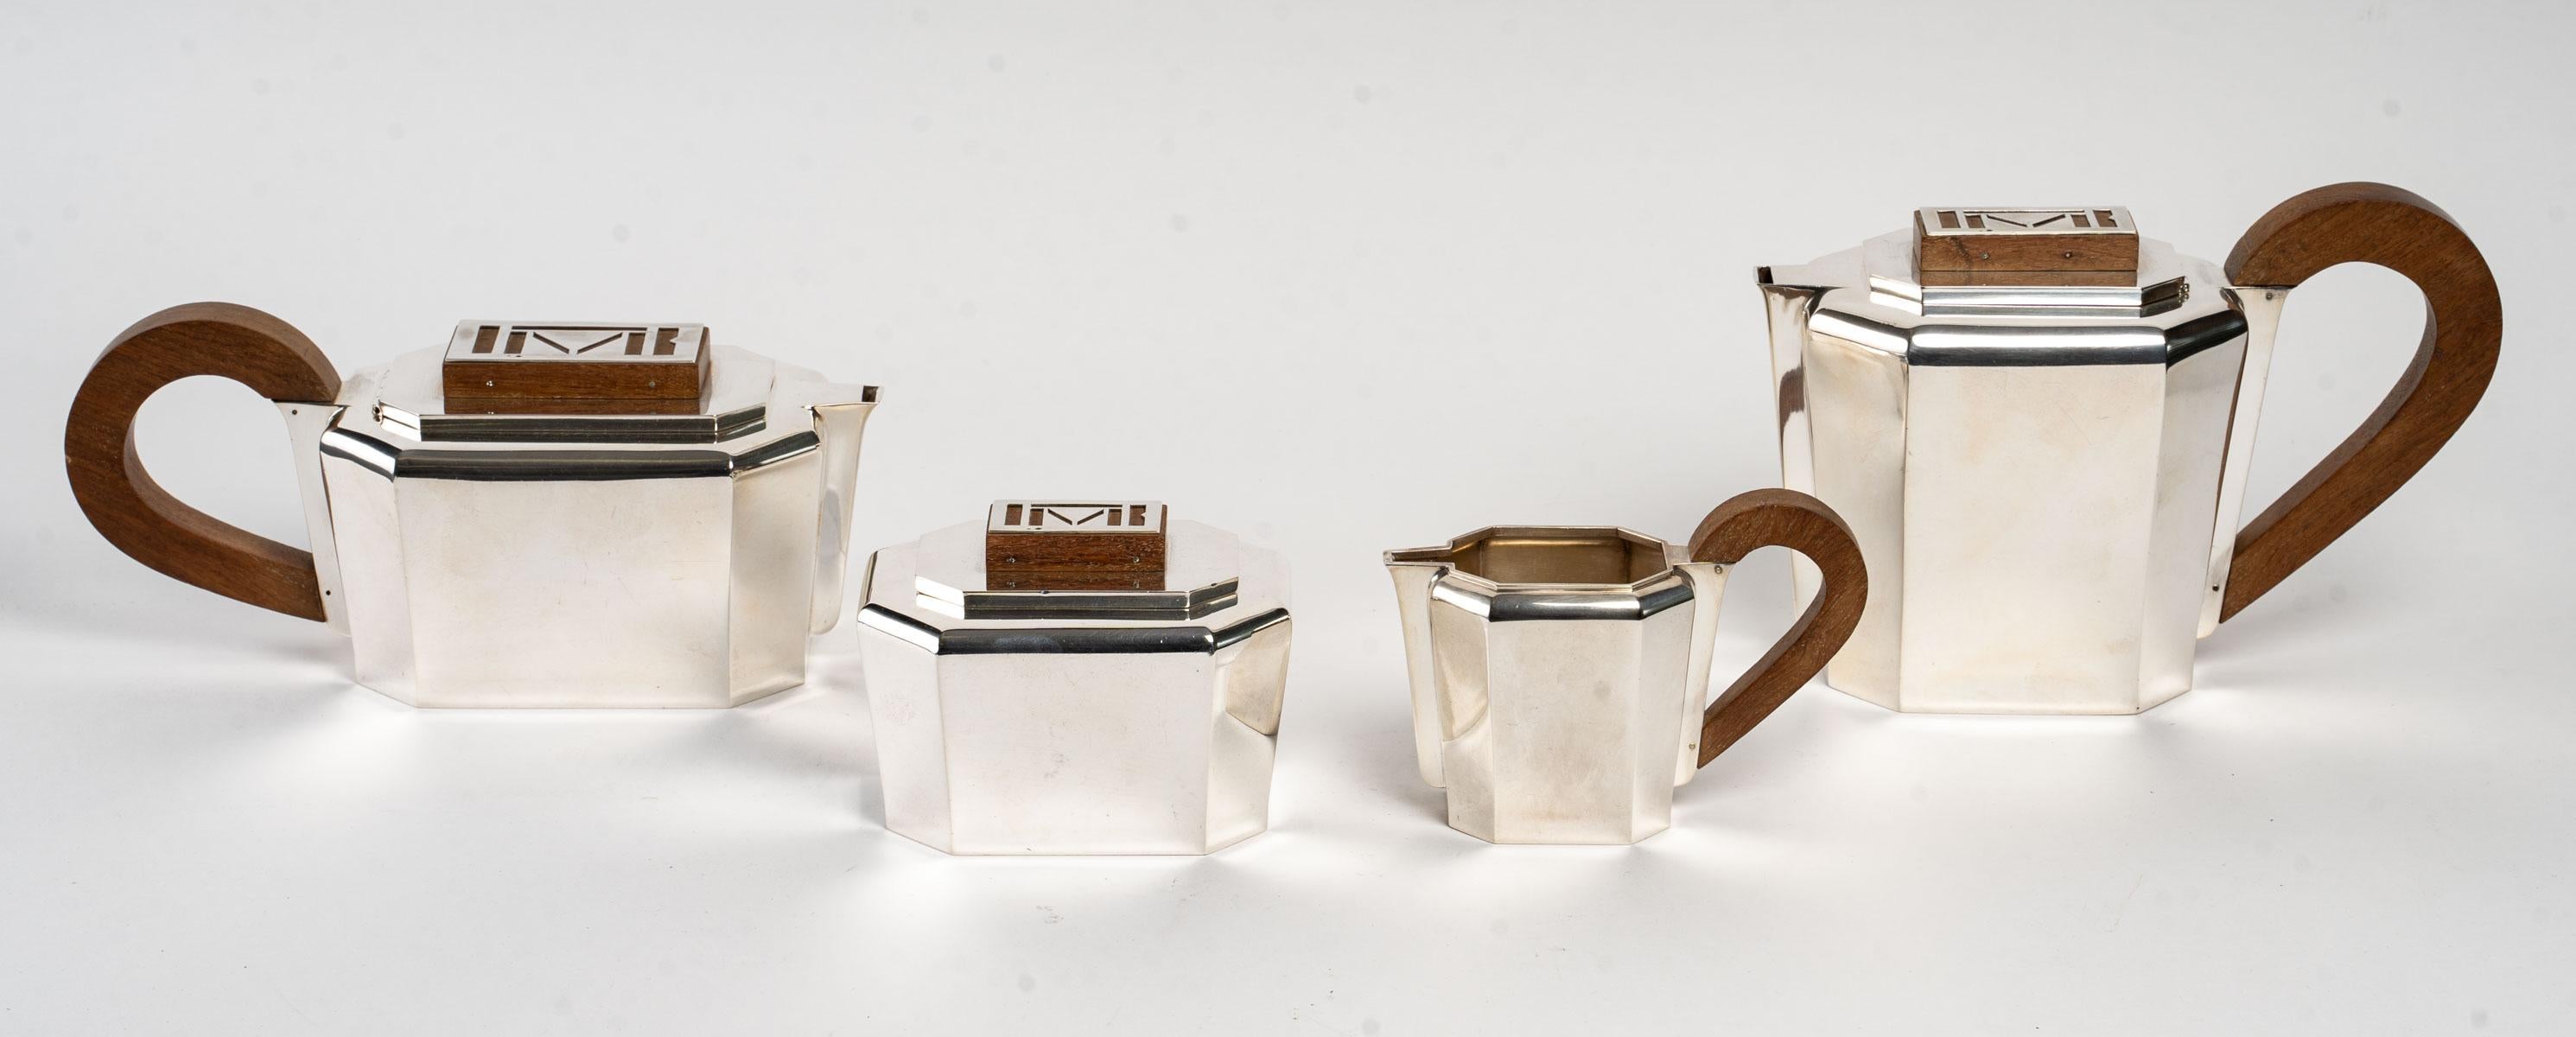 Art Deco Modernist tea and coffee service with cut sides in sterling pure silver and walnut by Jean E. Puiforcat.

Service including:
- a coffee pot: 14.5 cm x 22.5 cm x 10 cm
- a teapot: 10.5 cm x 10 cm x 10.5 cm
- a milk pot: 10 cm x 14 cm x 6 , 5